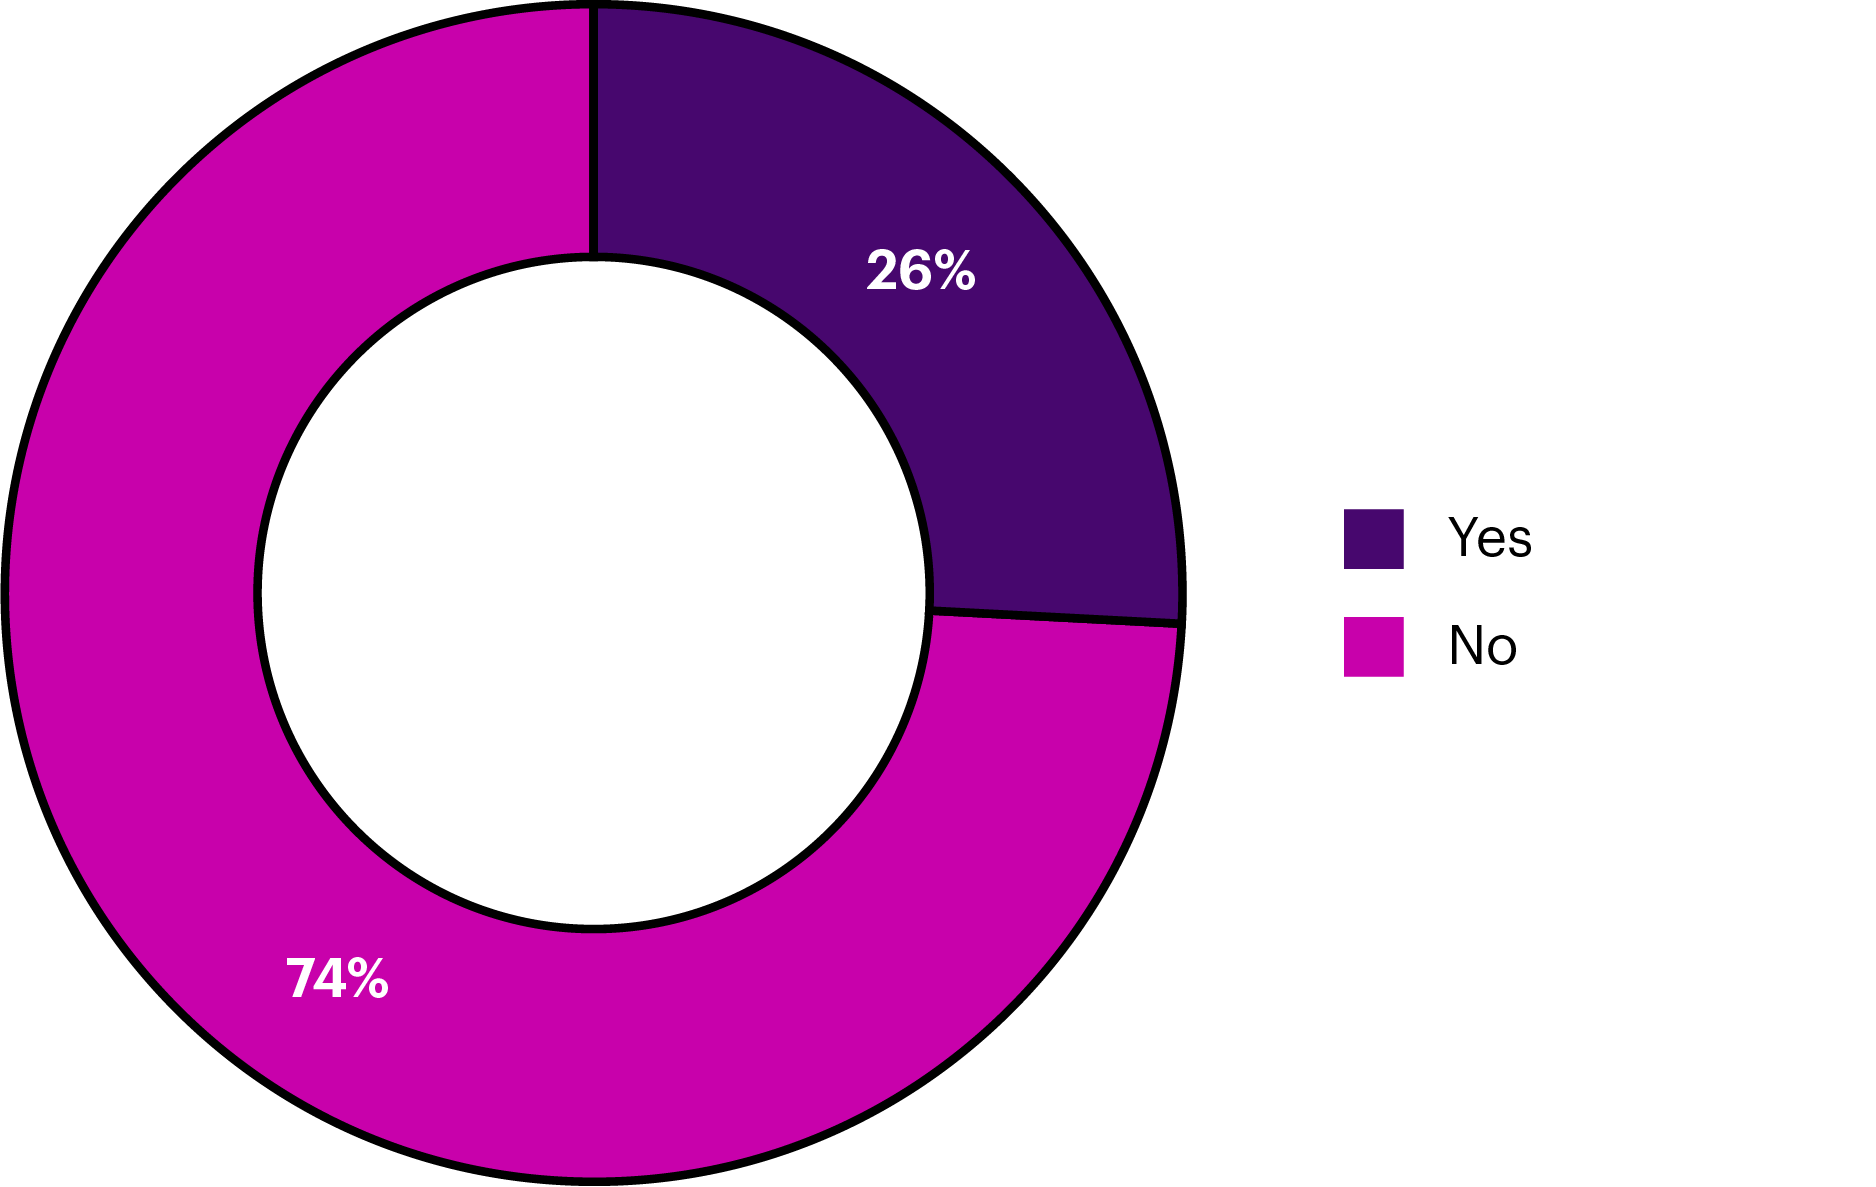 Pie chart showing that 74% of companies in 2021/22 used all of their apprenticeship levy allowance compared to 26% who did not 